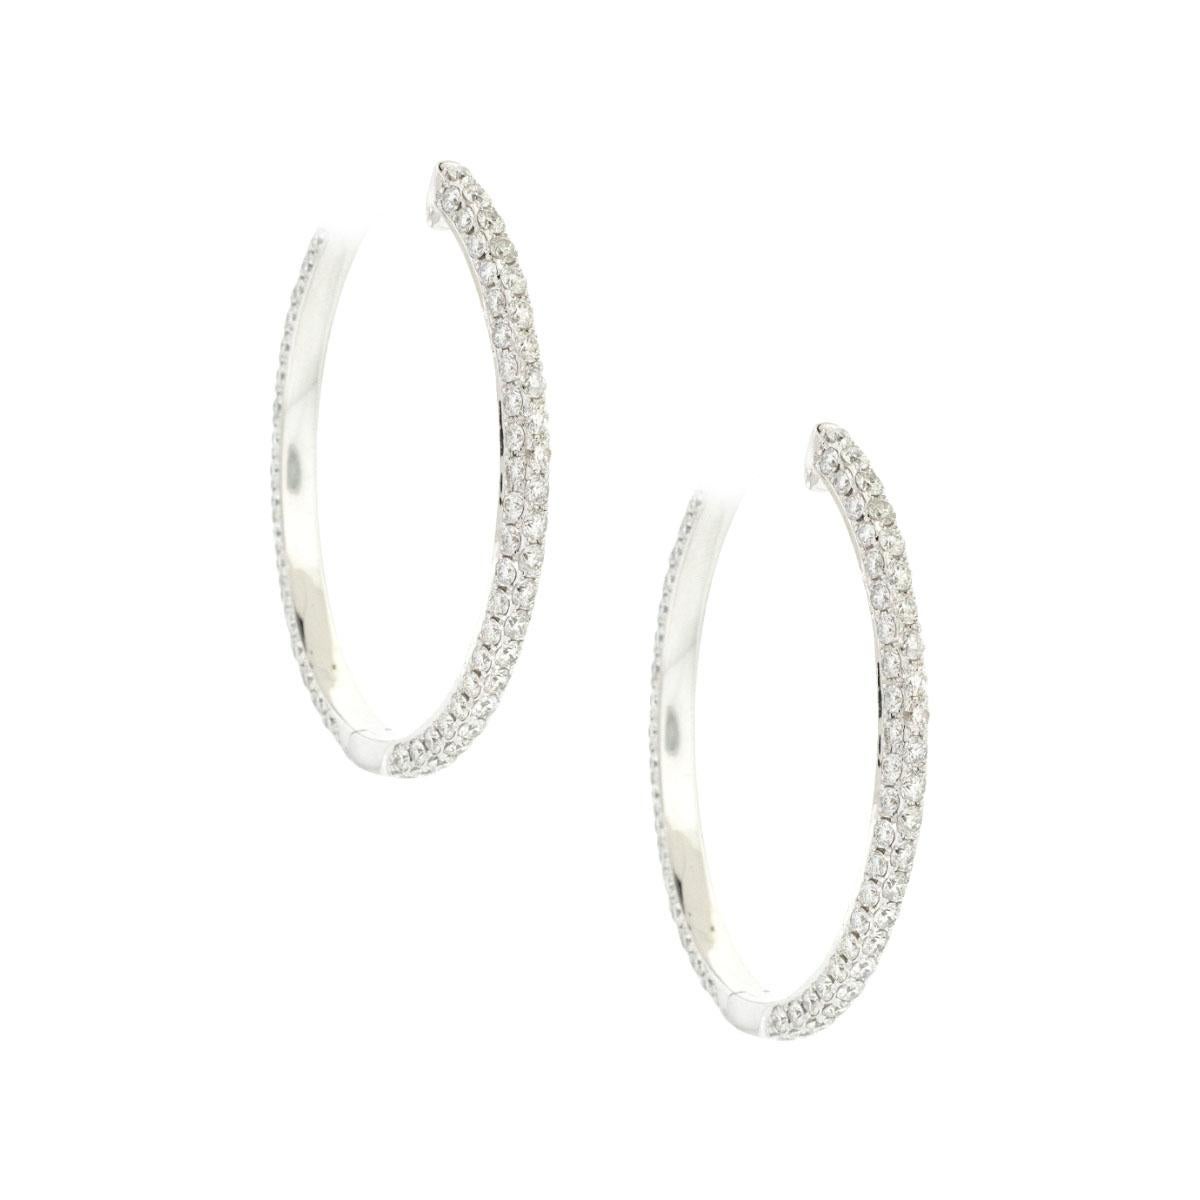 18k White Gold 8.29ctw Diamond Pave Oval Hoop Earrings

Company: Unbranded

Style of jewelry: Diamond Pave hoop earrings

Material: 18k white gold

Stones: Approximately 8.29ctw of round cut Diamonds. They are approximately G/H in color and VS/SI in